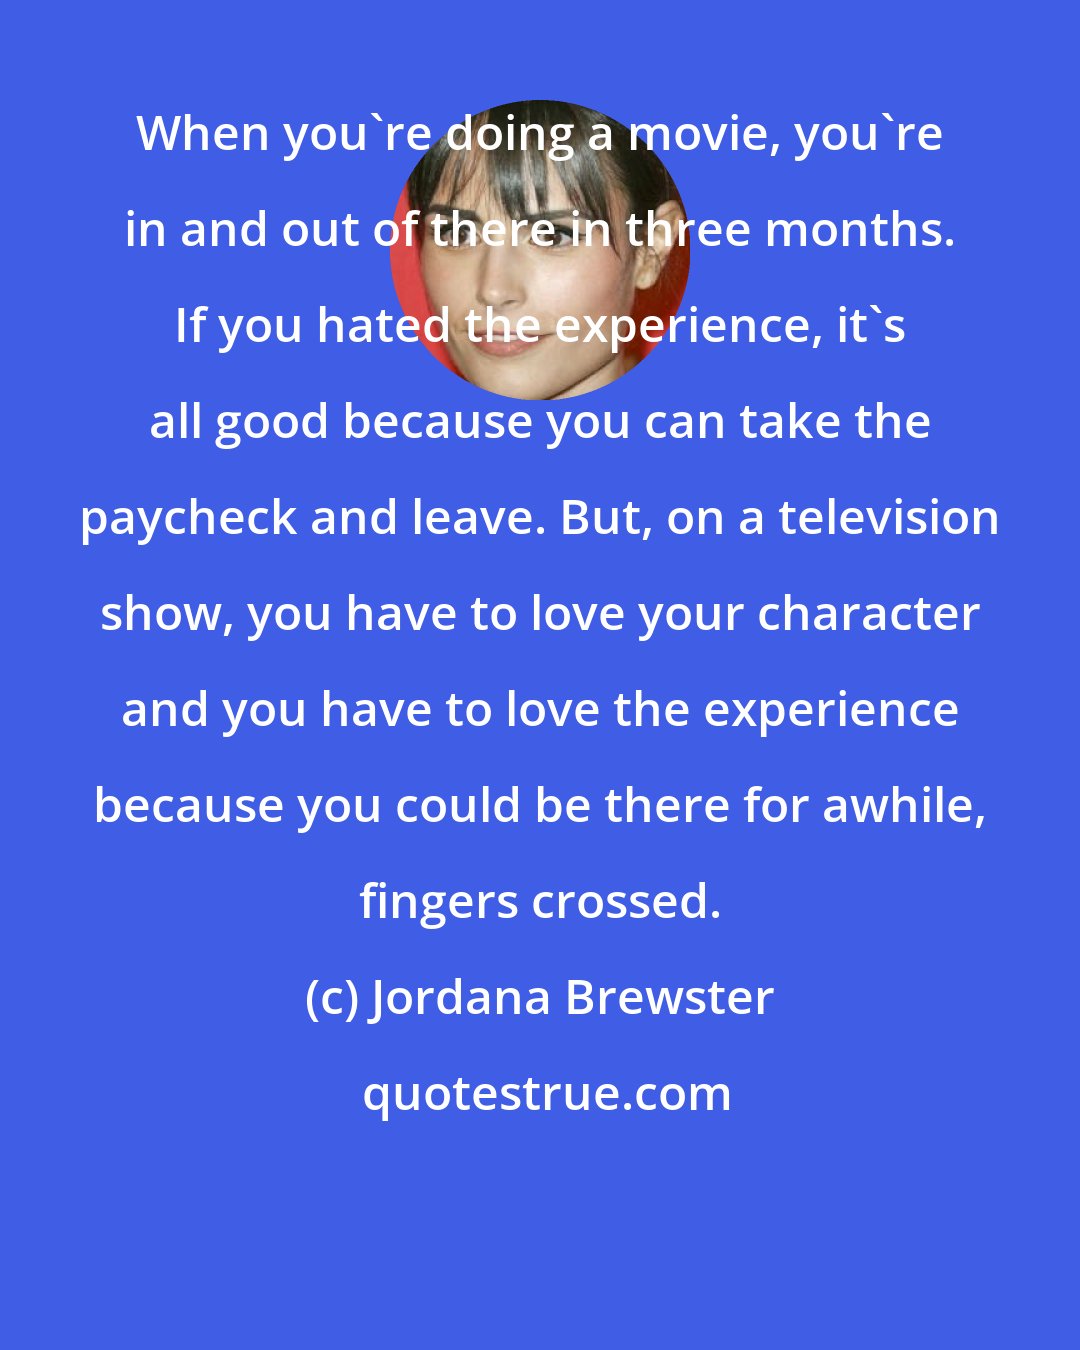 Jordana Brewster: When you're doing a movie, you're in and out of there in three months. If you hated the experience, it's all good because you can take the paycheck and leave. But, on a television show, you have to love your character and you have to love the experience because you could be there for awhile, fingers crossed.